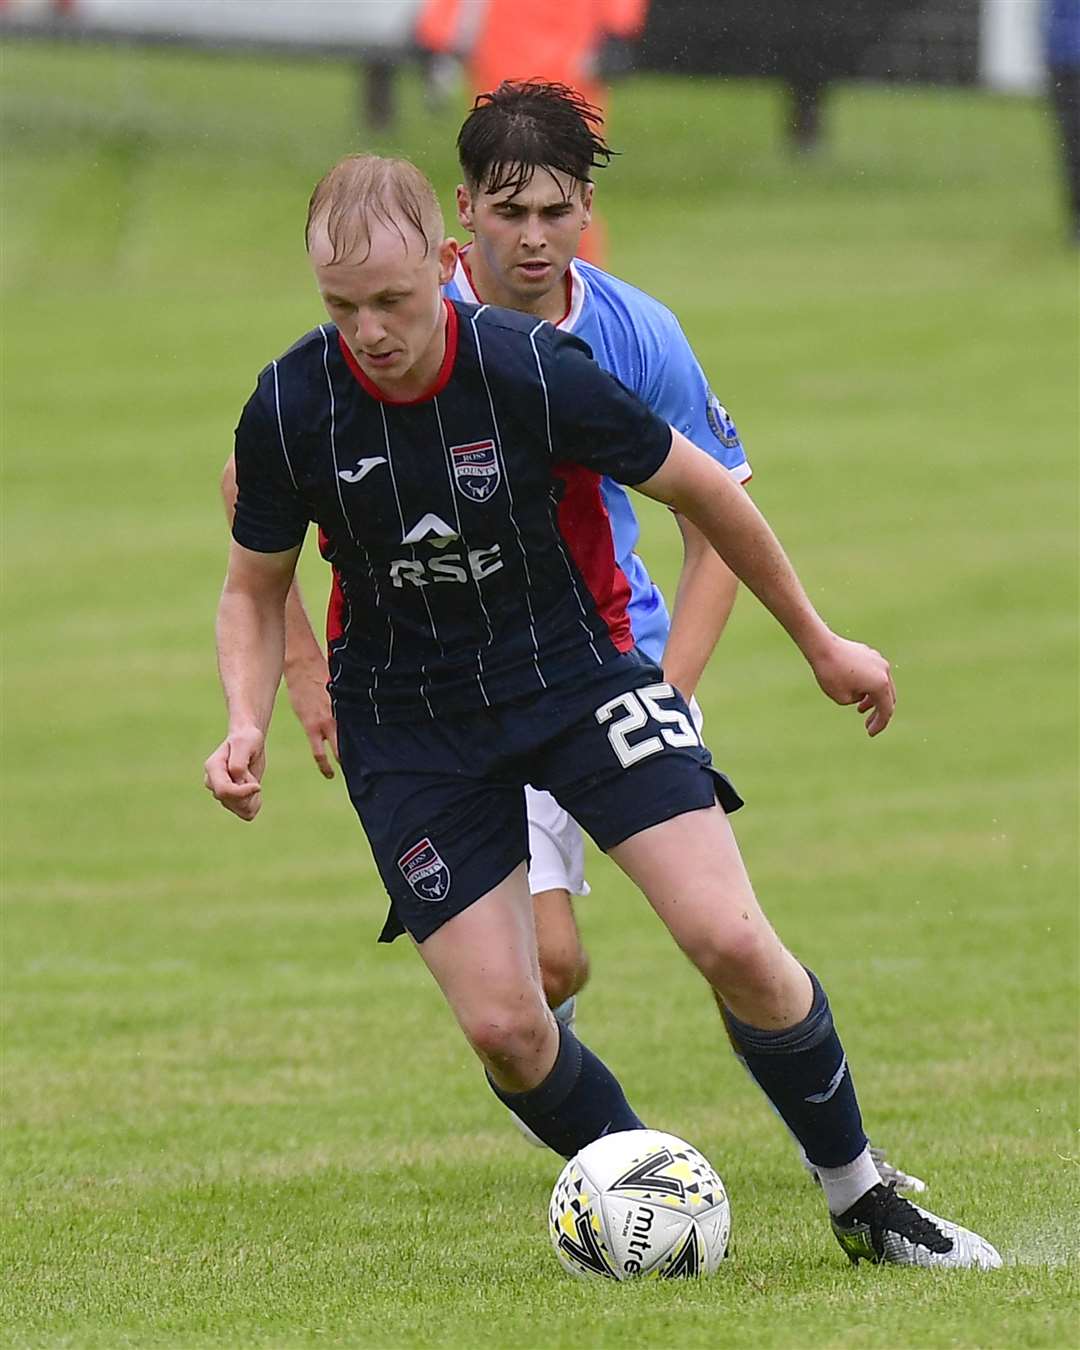 Ross County's Ethan Kevill and Wick's Gary Pullen at Harmsworth Park in July this year.